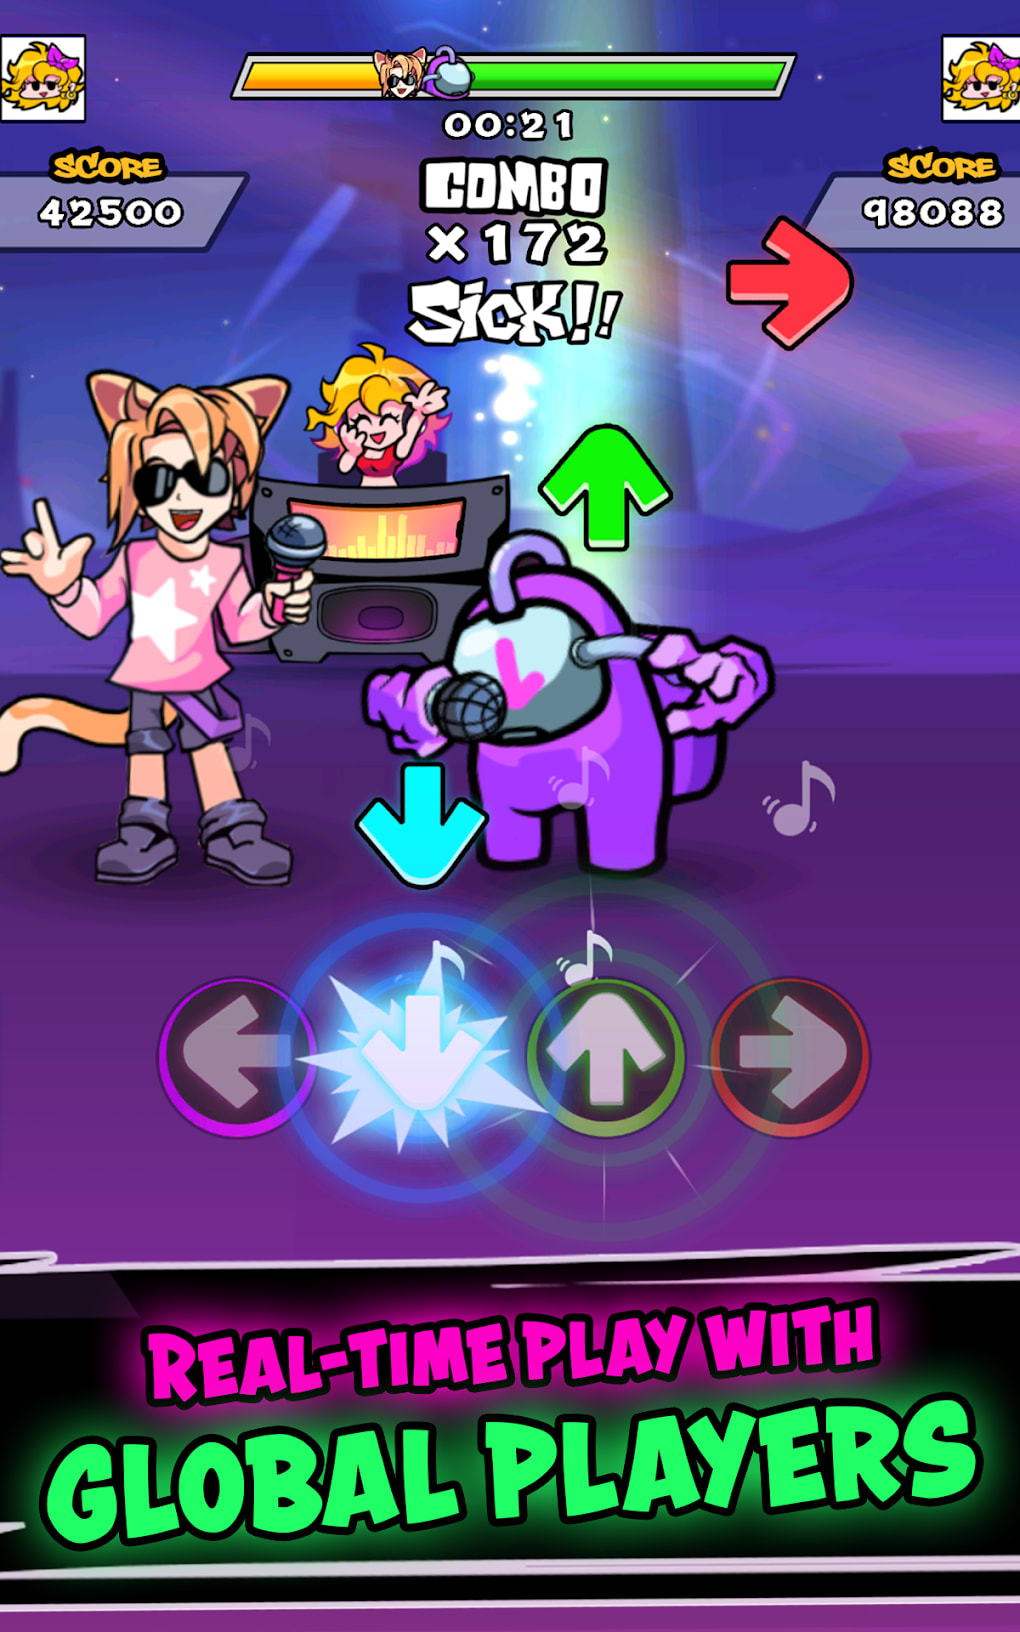 FNF Battle - Friday Night Funkin Mod for Android - Download the APK from  Uptodown